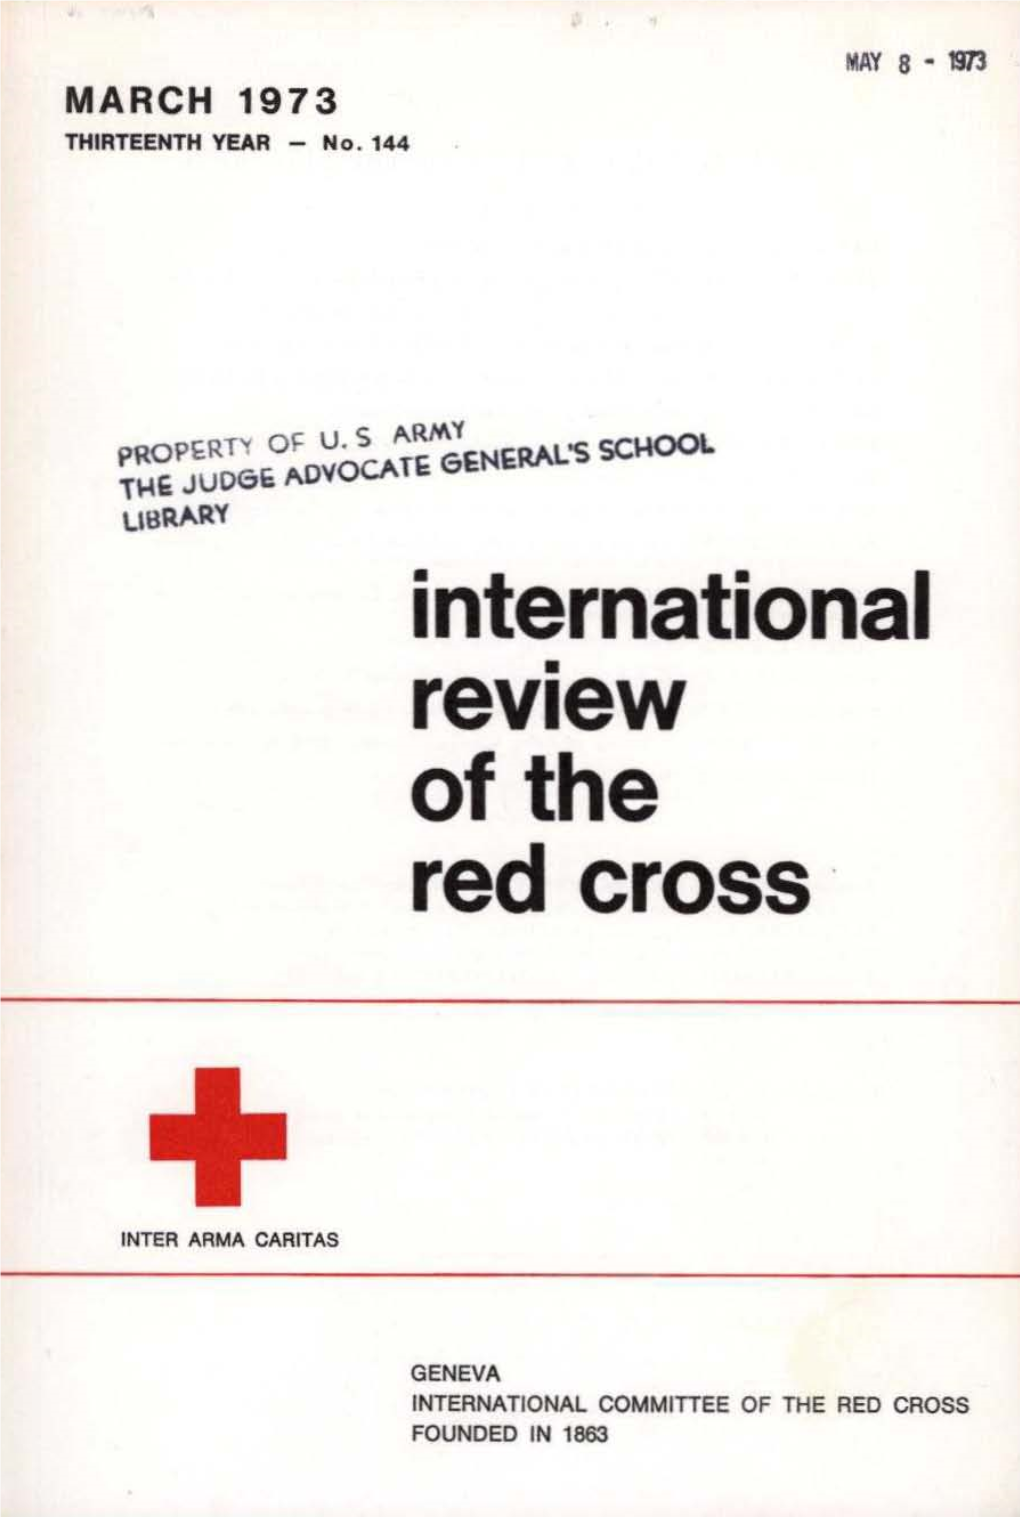 International Review of the Red Cross, March 1973, Thirteenth Year